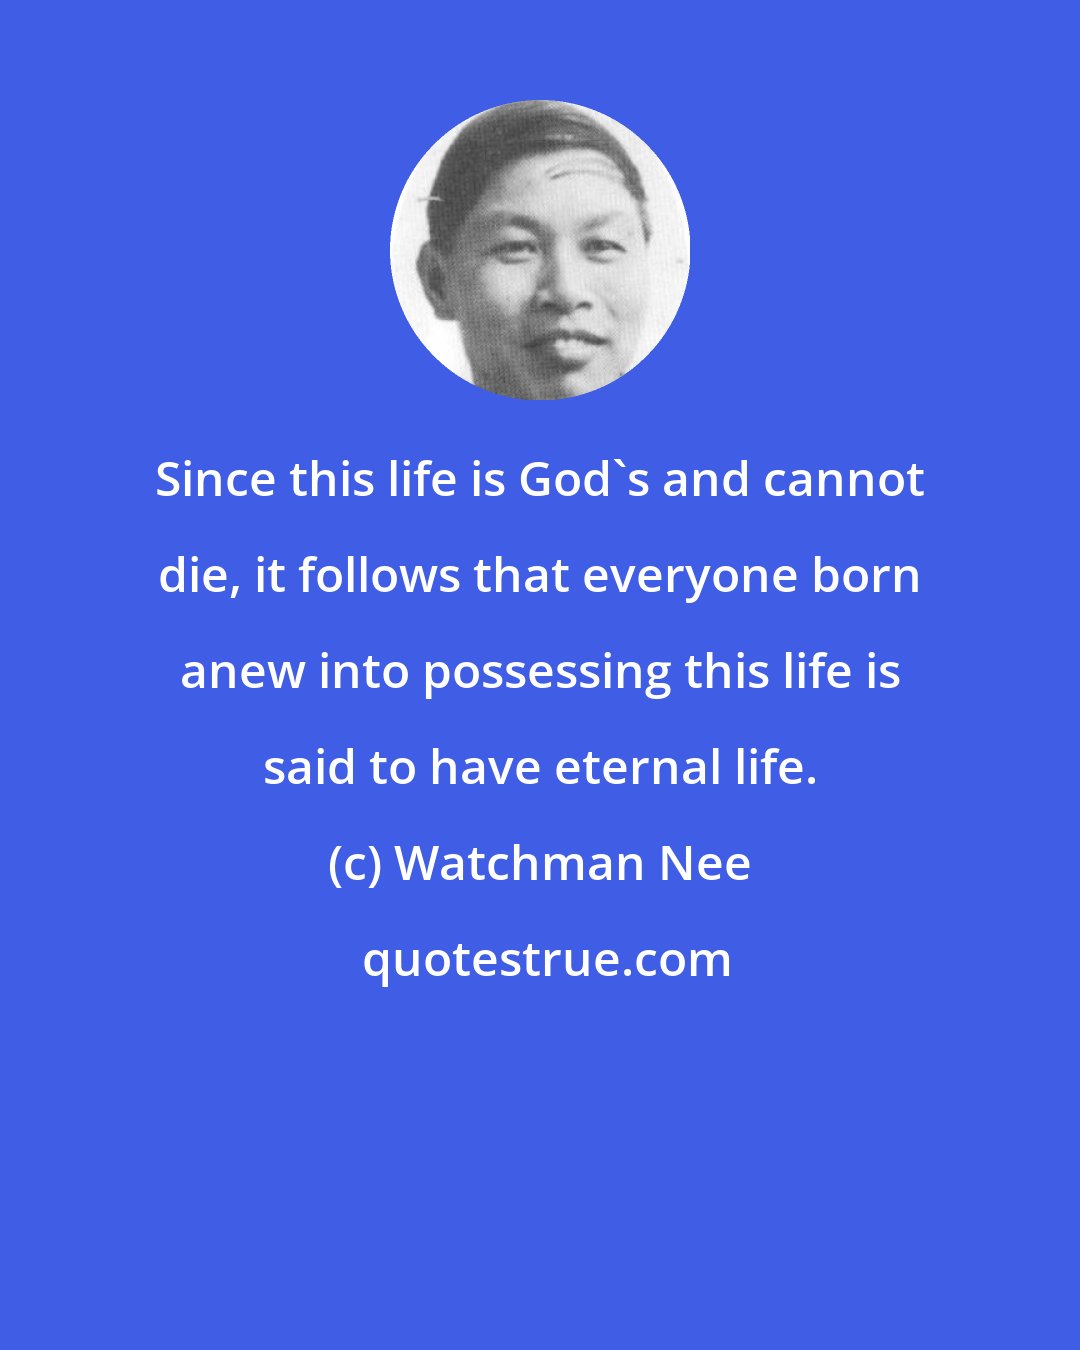 Watchman Nee: Since this life is God's and cannot die, it follows that everyone born anew into possessing this life is said to have eternal life.